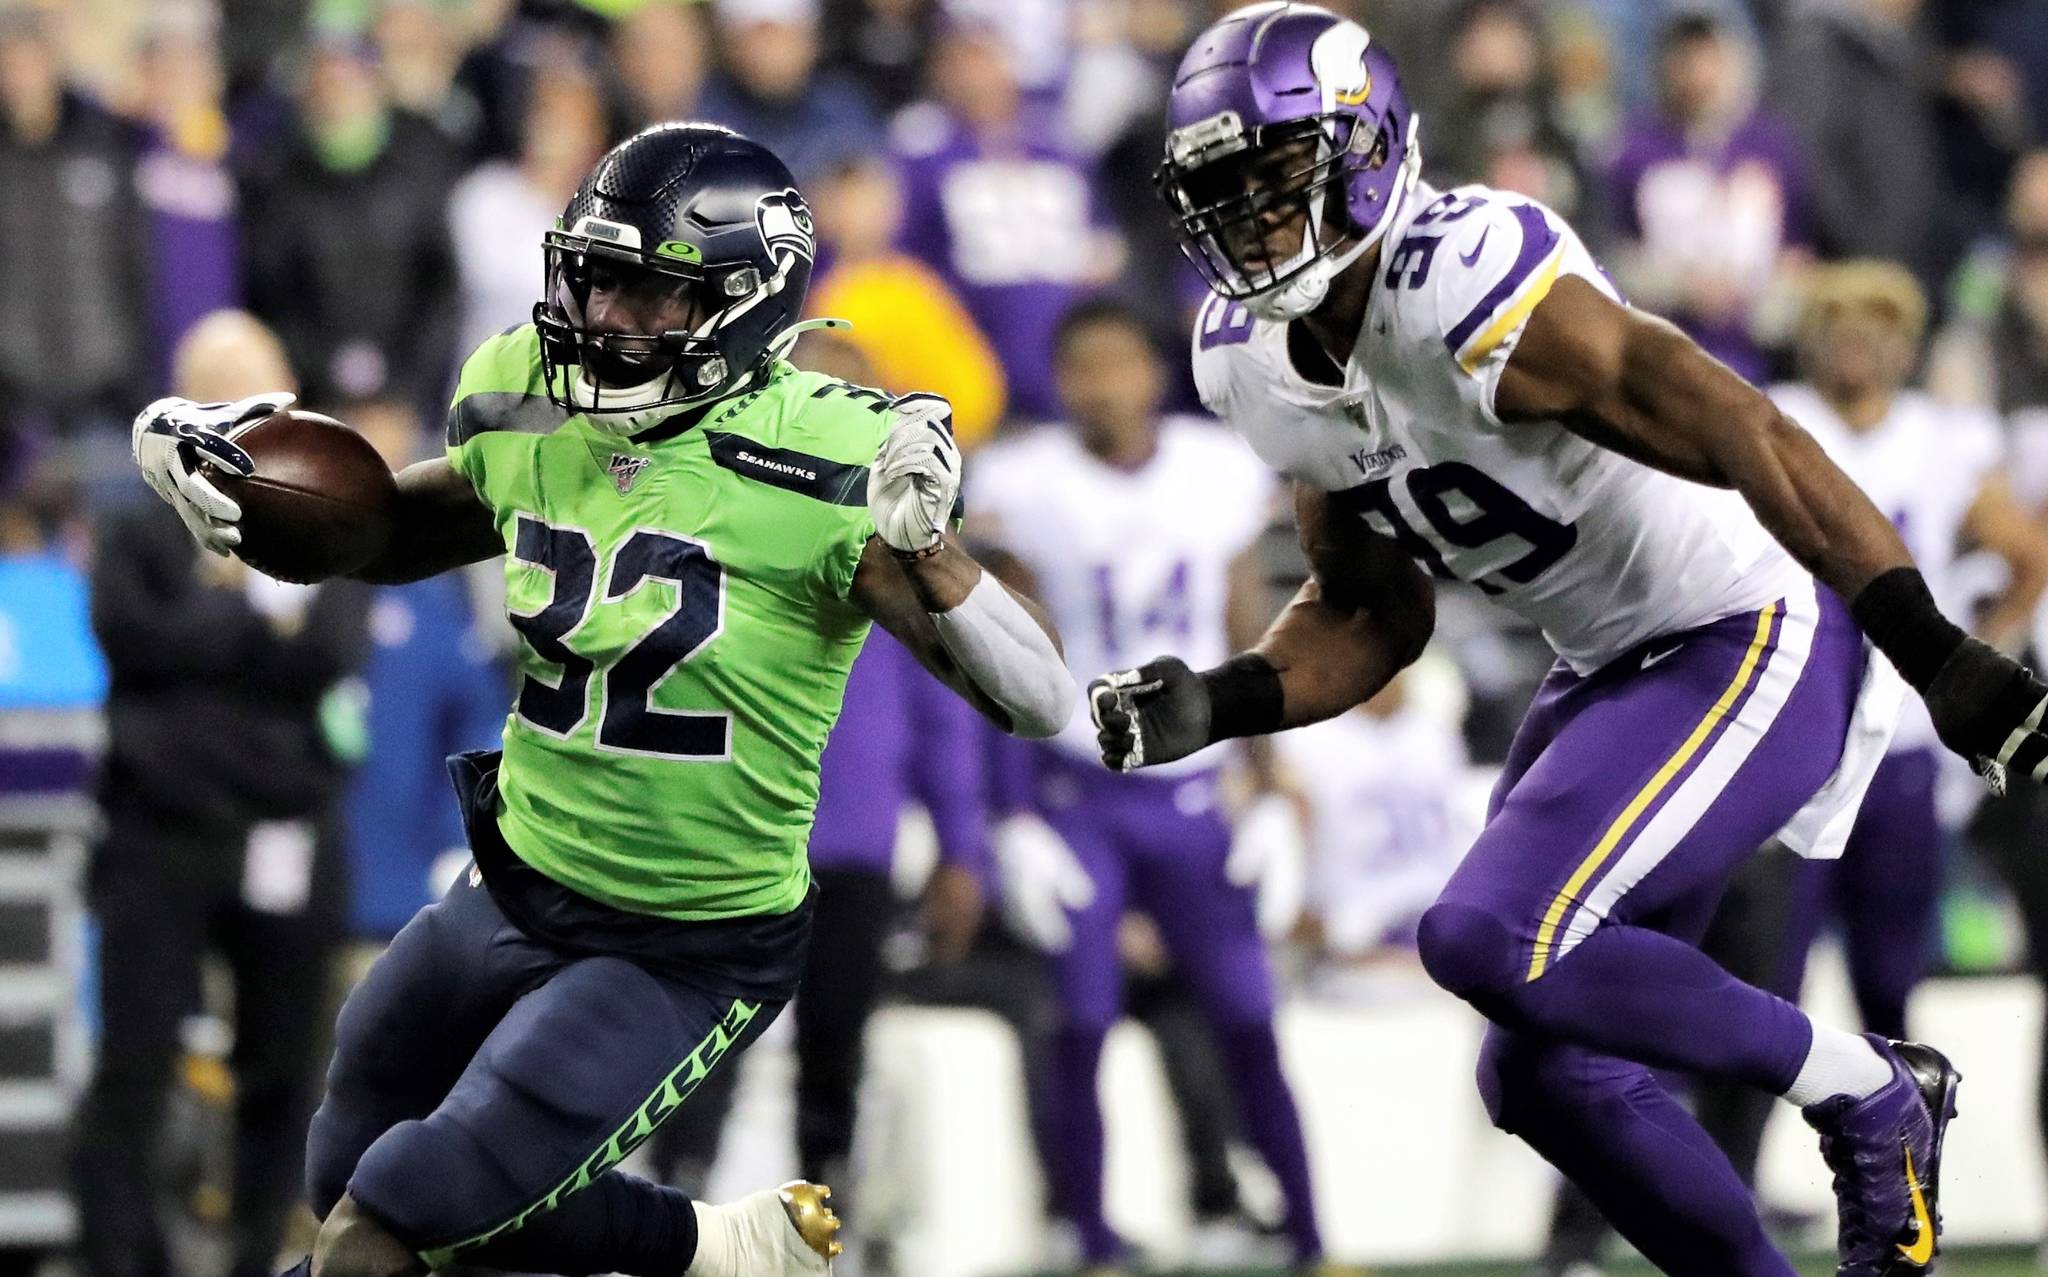 SEAHAWKS: Seattle fends off Minnesota 37-30 to claim first in NFC West